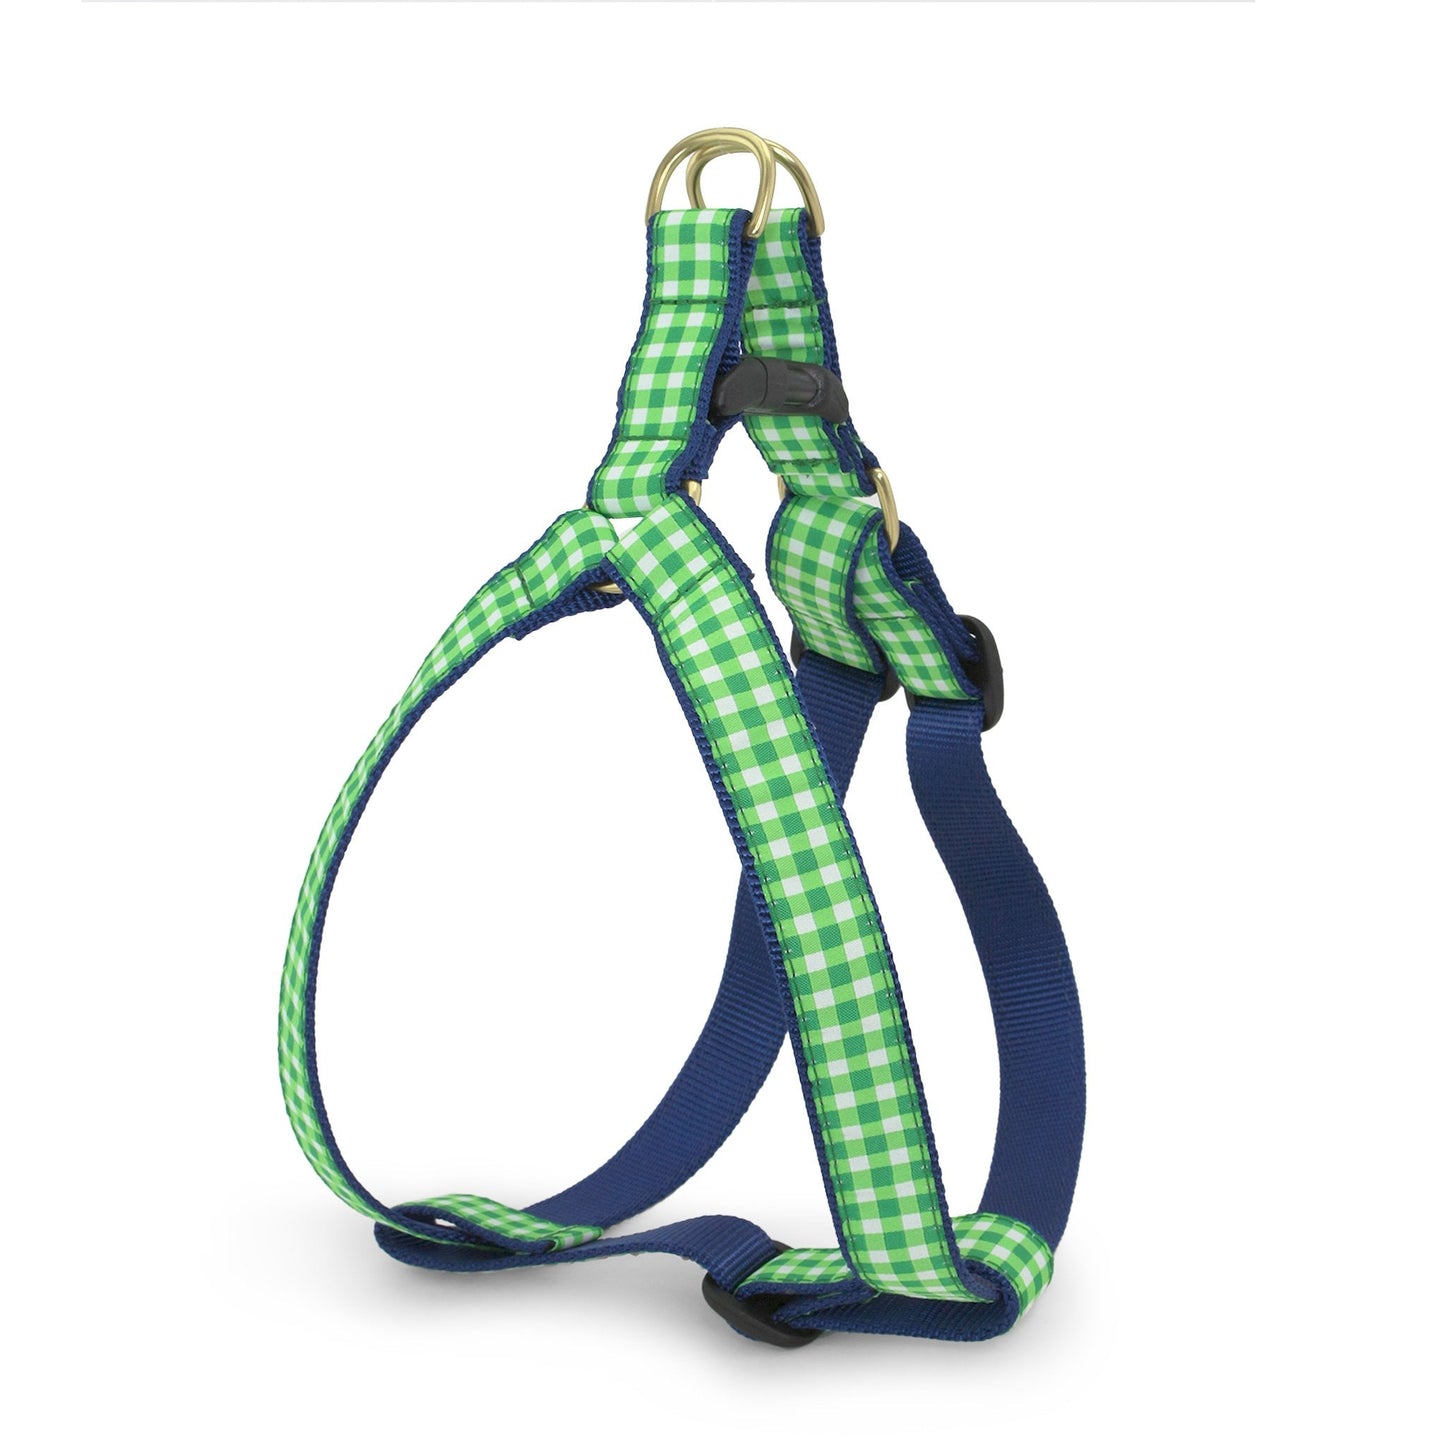 Lime Gingham Dog Harness by Up Country